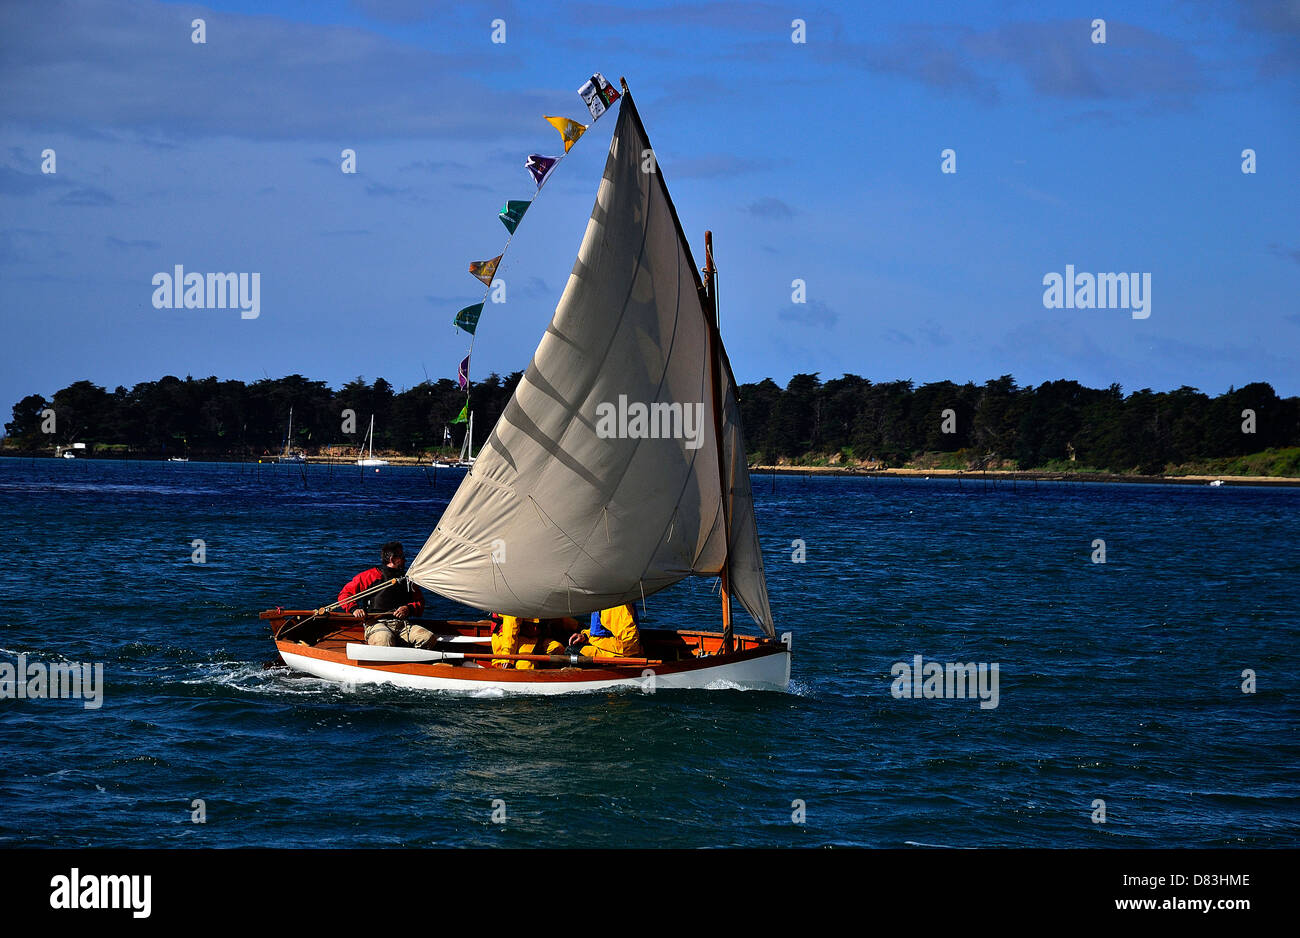 Small sailing boat, sail and oar boat sailing in Morbihan gulf, during maritime event 'Semaine du golfe'. Stock Photo